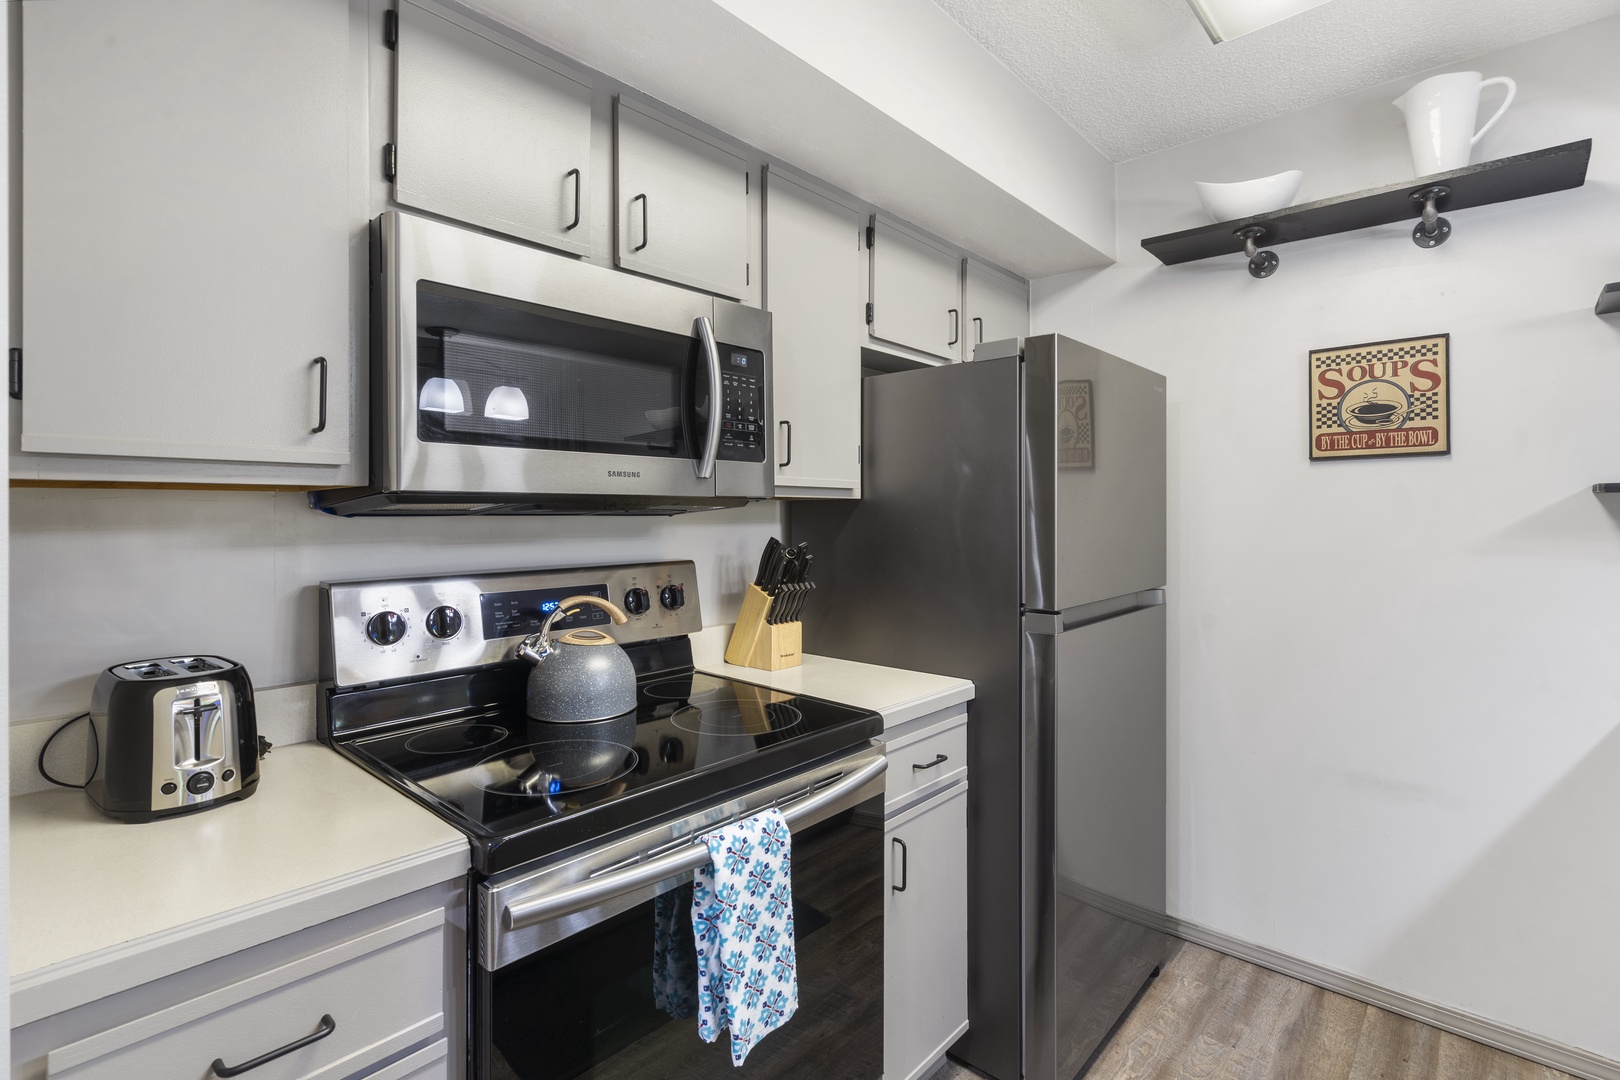 Unit #4 Fully furnished and equipped kitchen